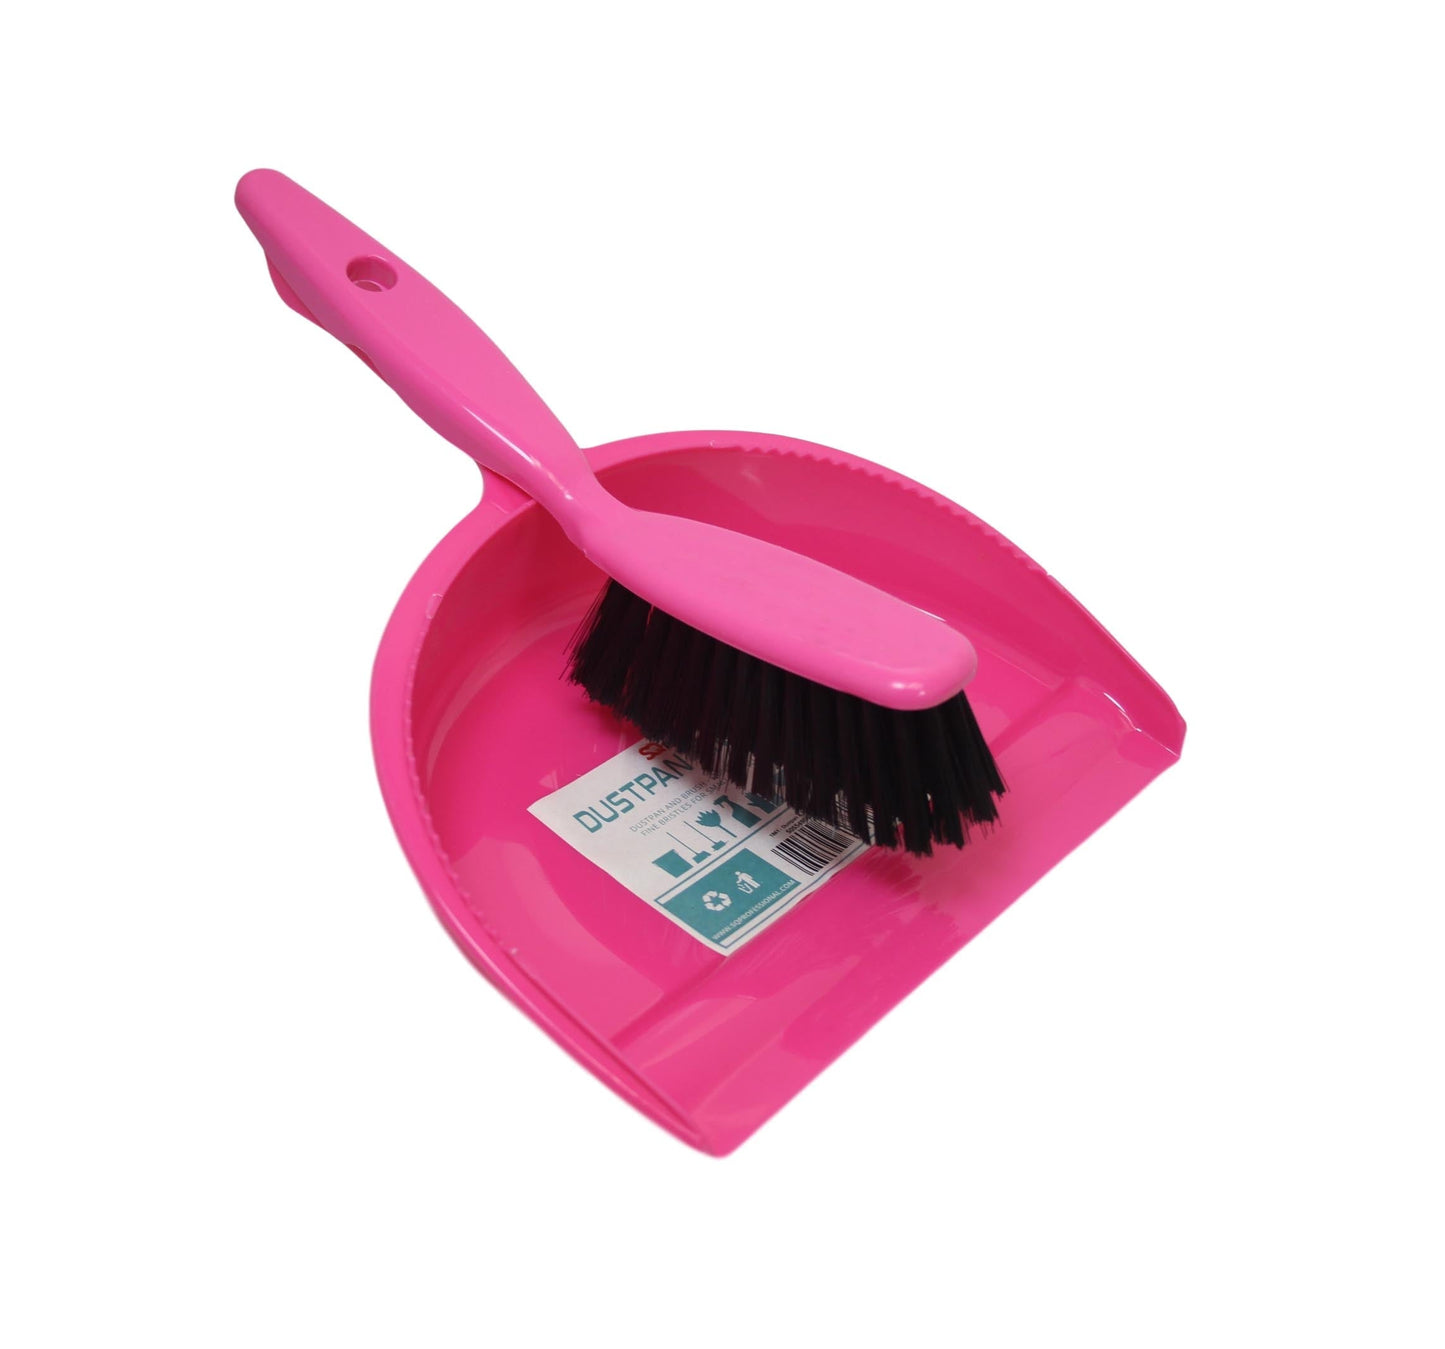 Small Dustpan And Brush Home Bedroom Bathroom Blue/Pink Random Sent 18611 A  (Parcel Rate)